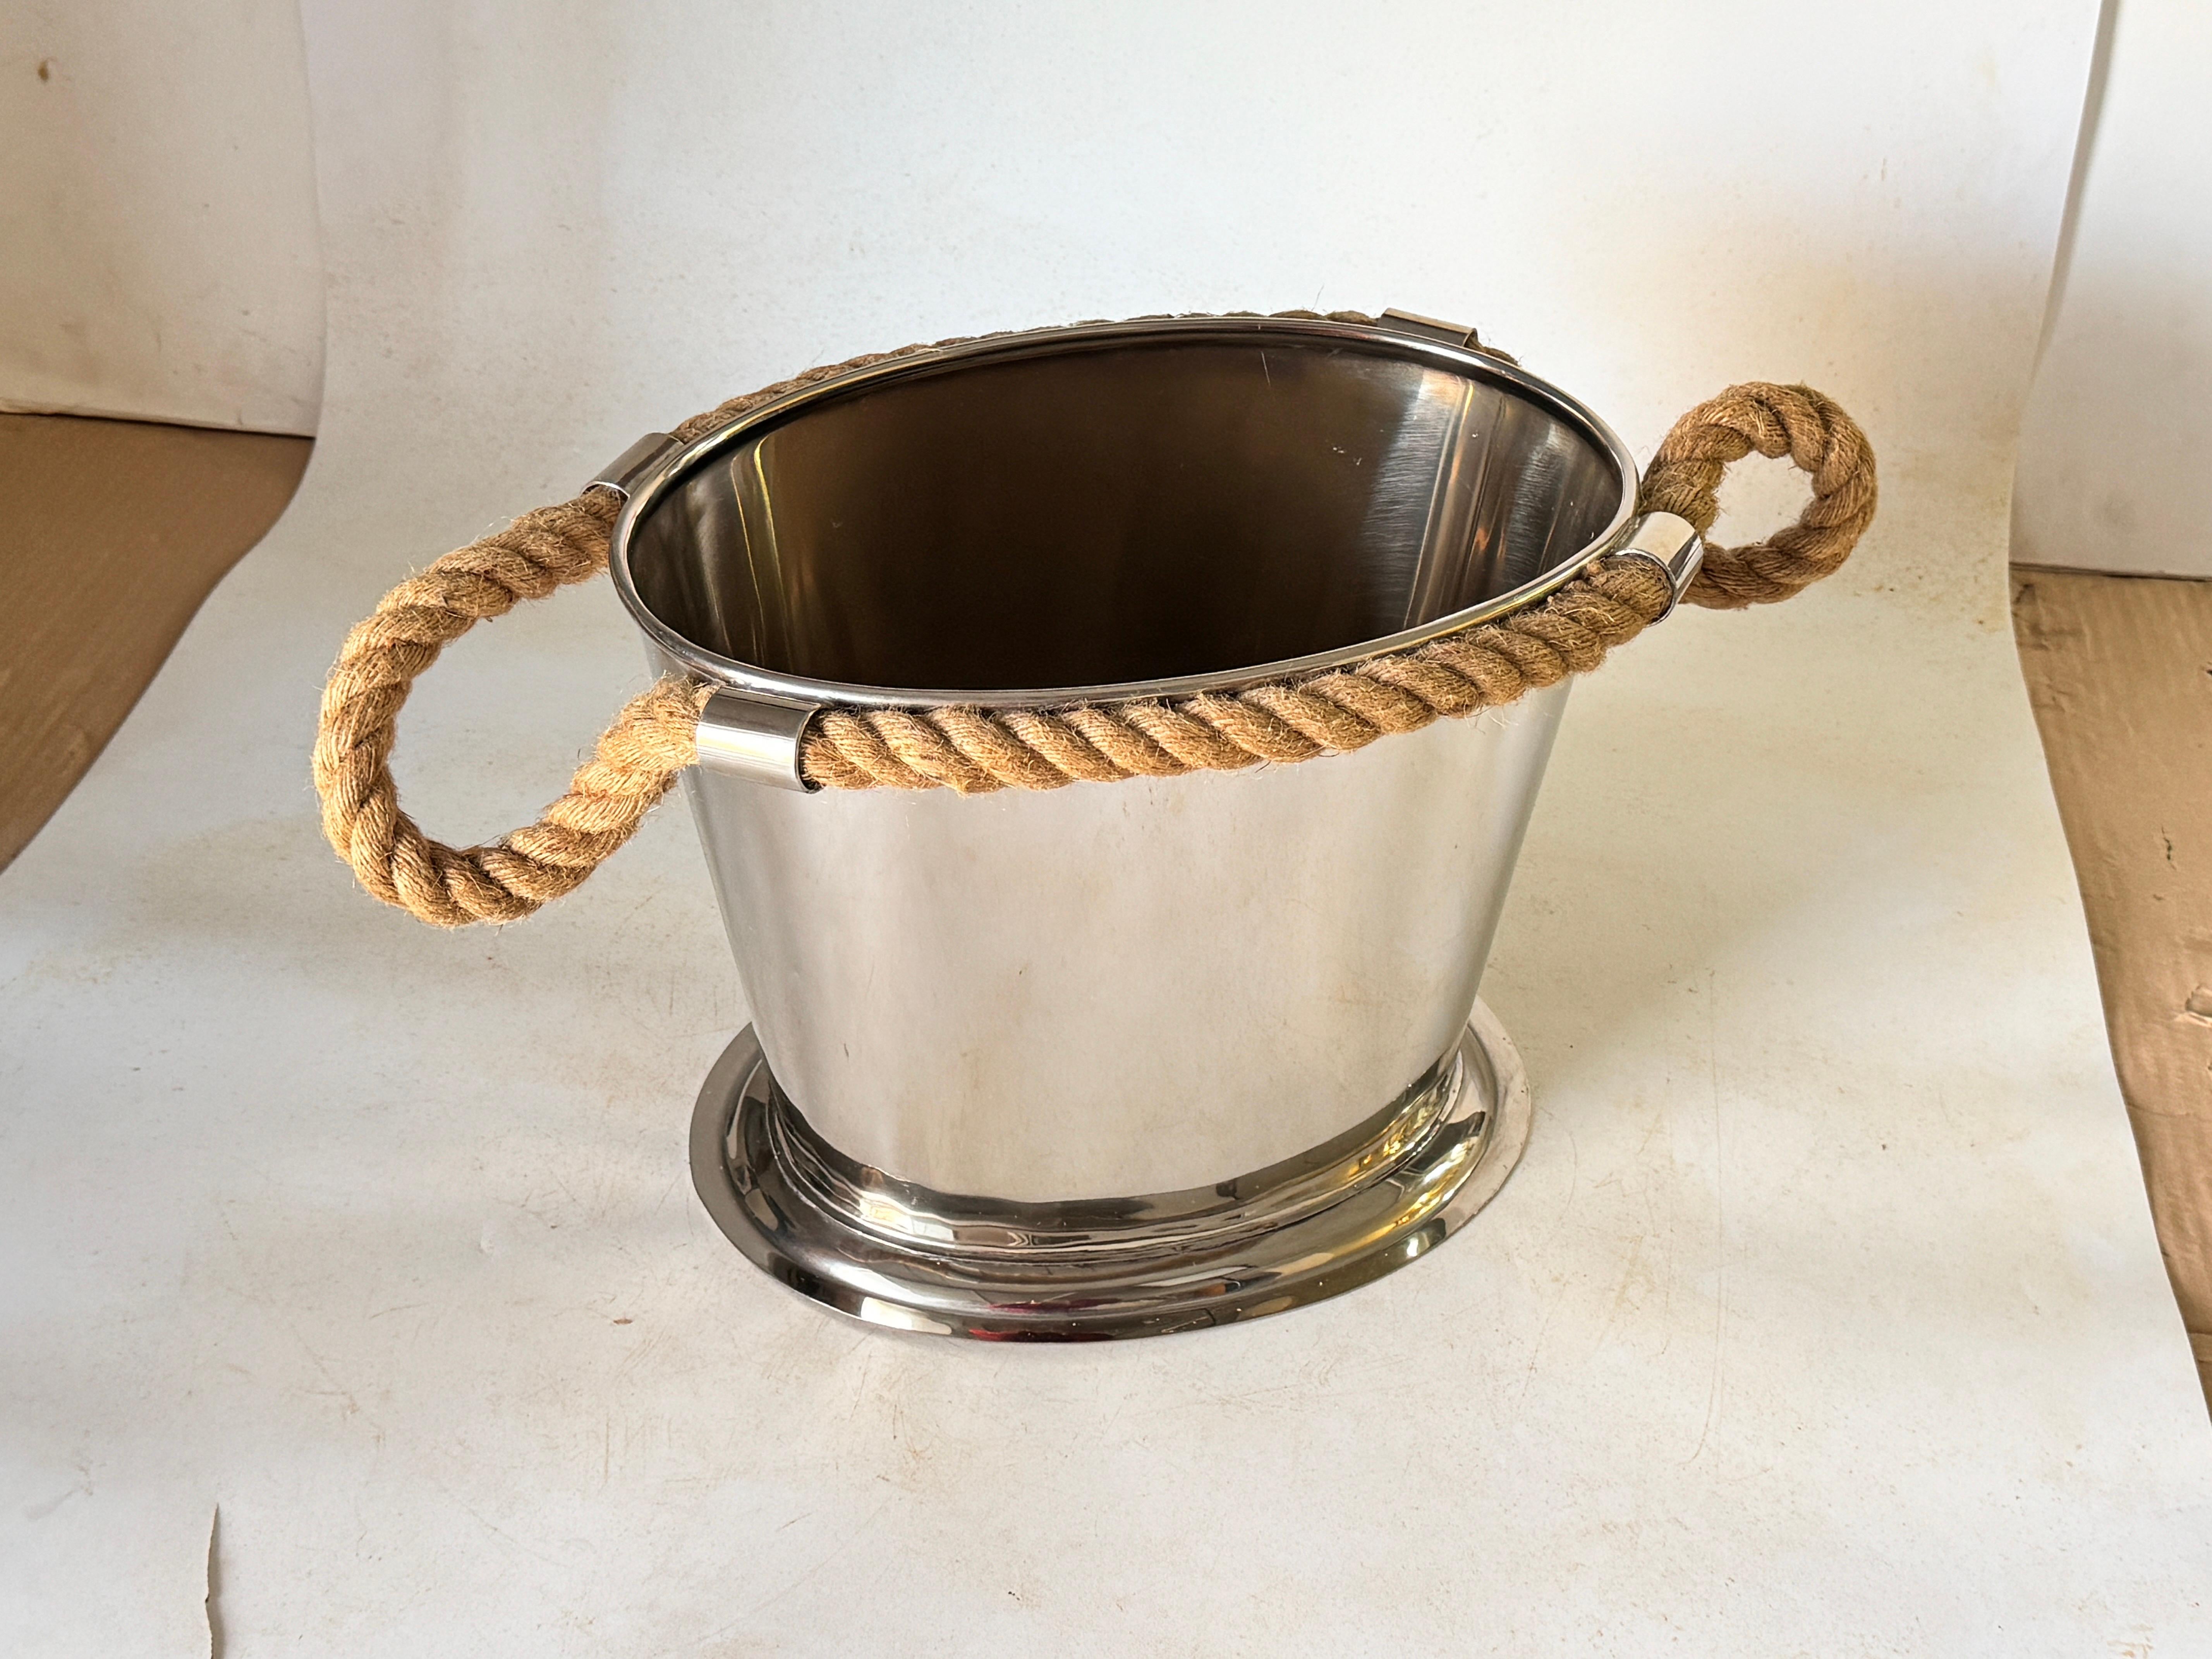 Large Champagne bucket or ice bucket with a silvere color.
Champagne cooler, with rope Handles
Ice bucket.
Yachting Style, luxury  boat  atmosphere.
In High quality Chrome.
